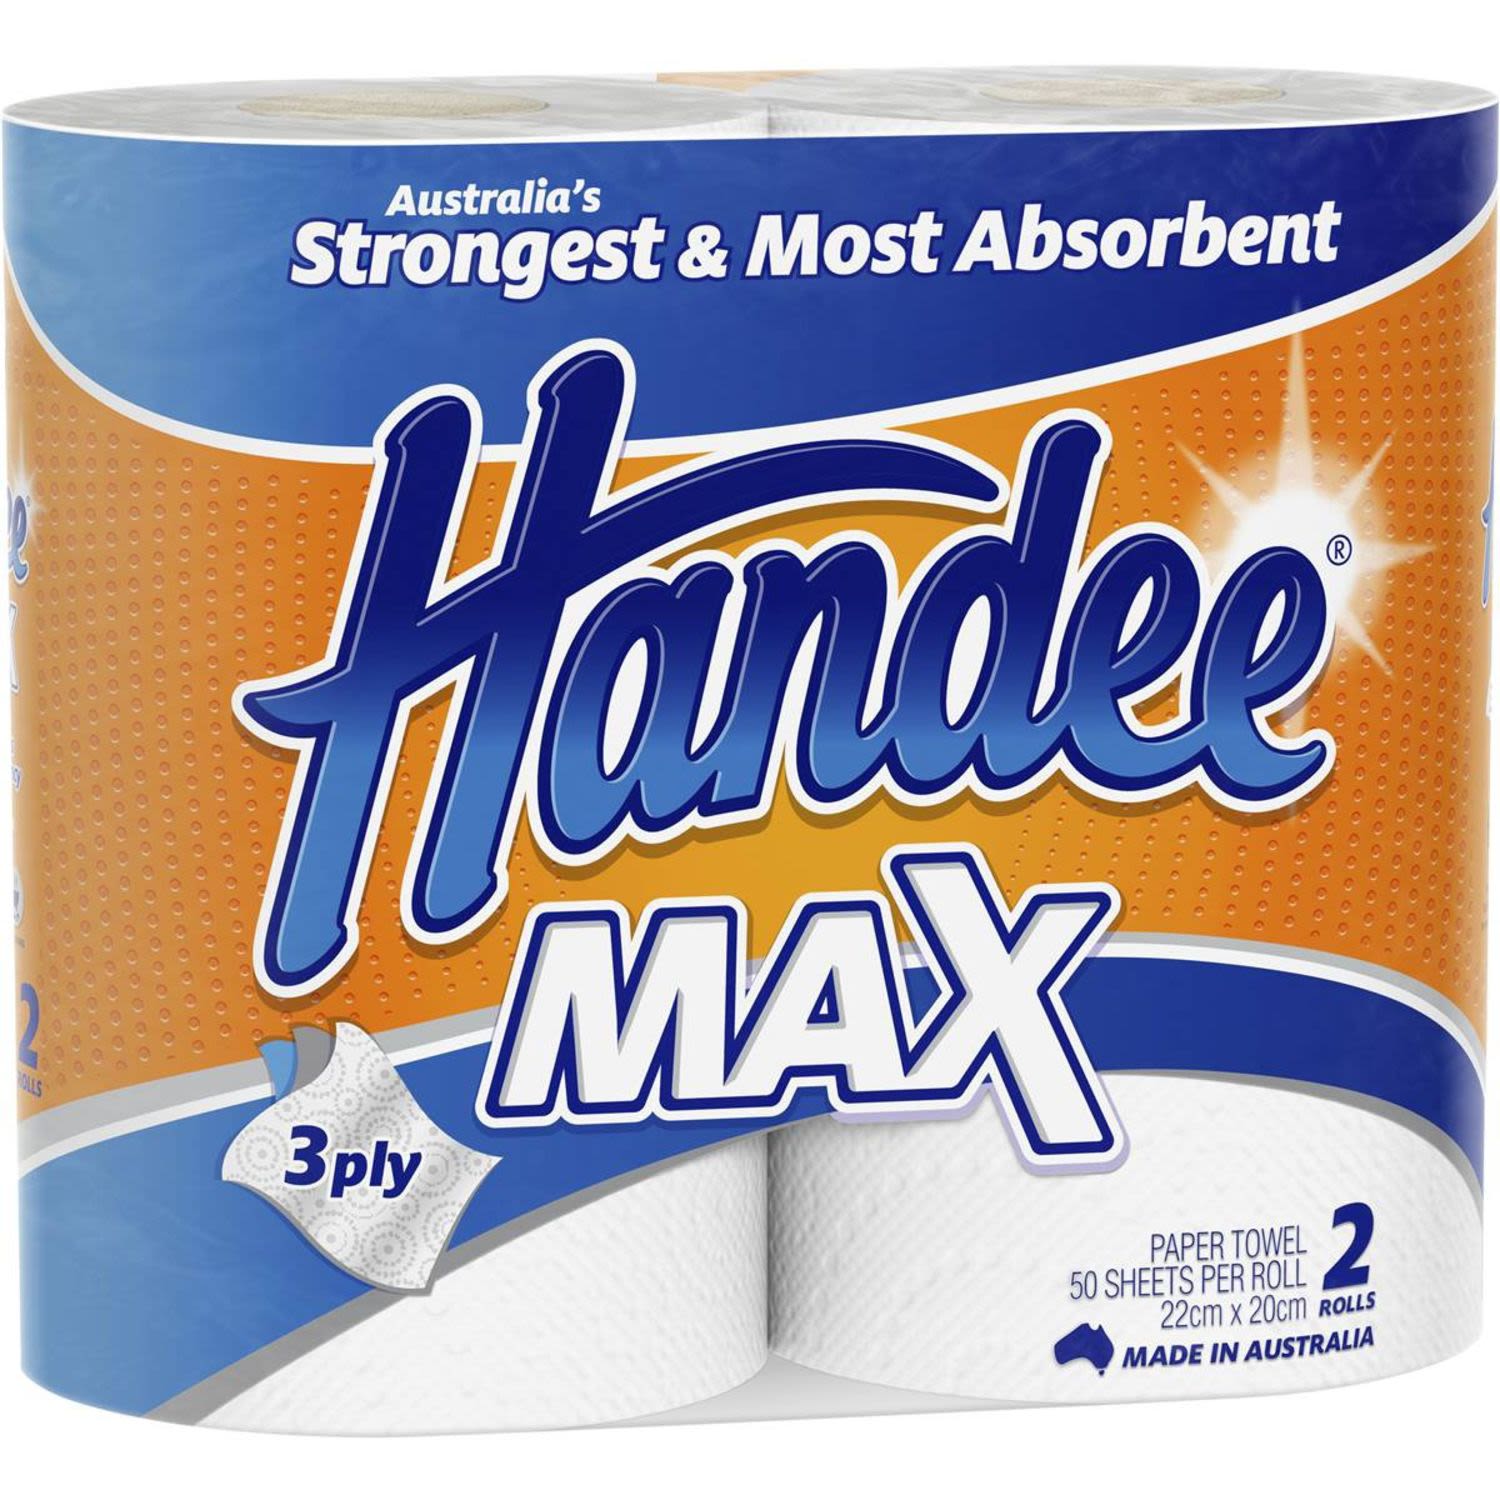 Handee Max Paper Towel White 3ply, 2 Each